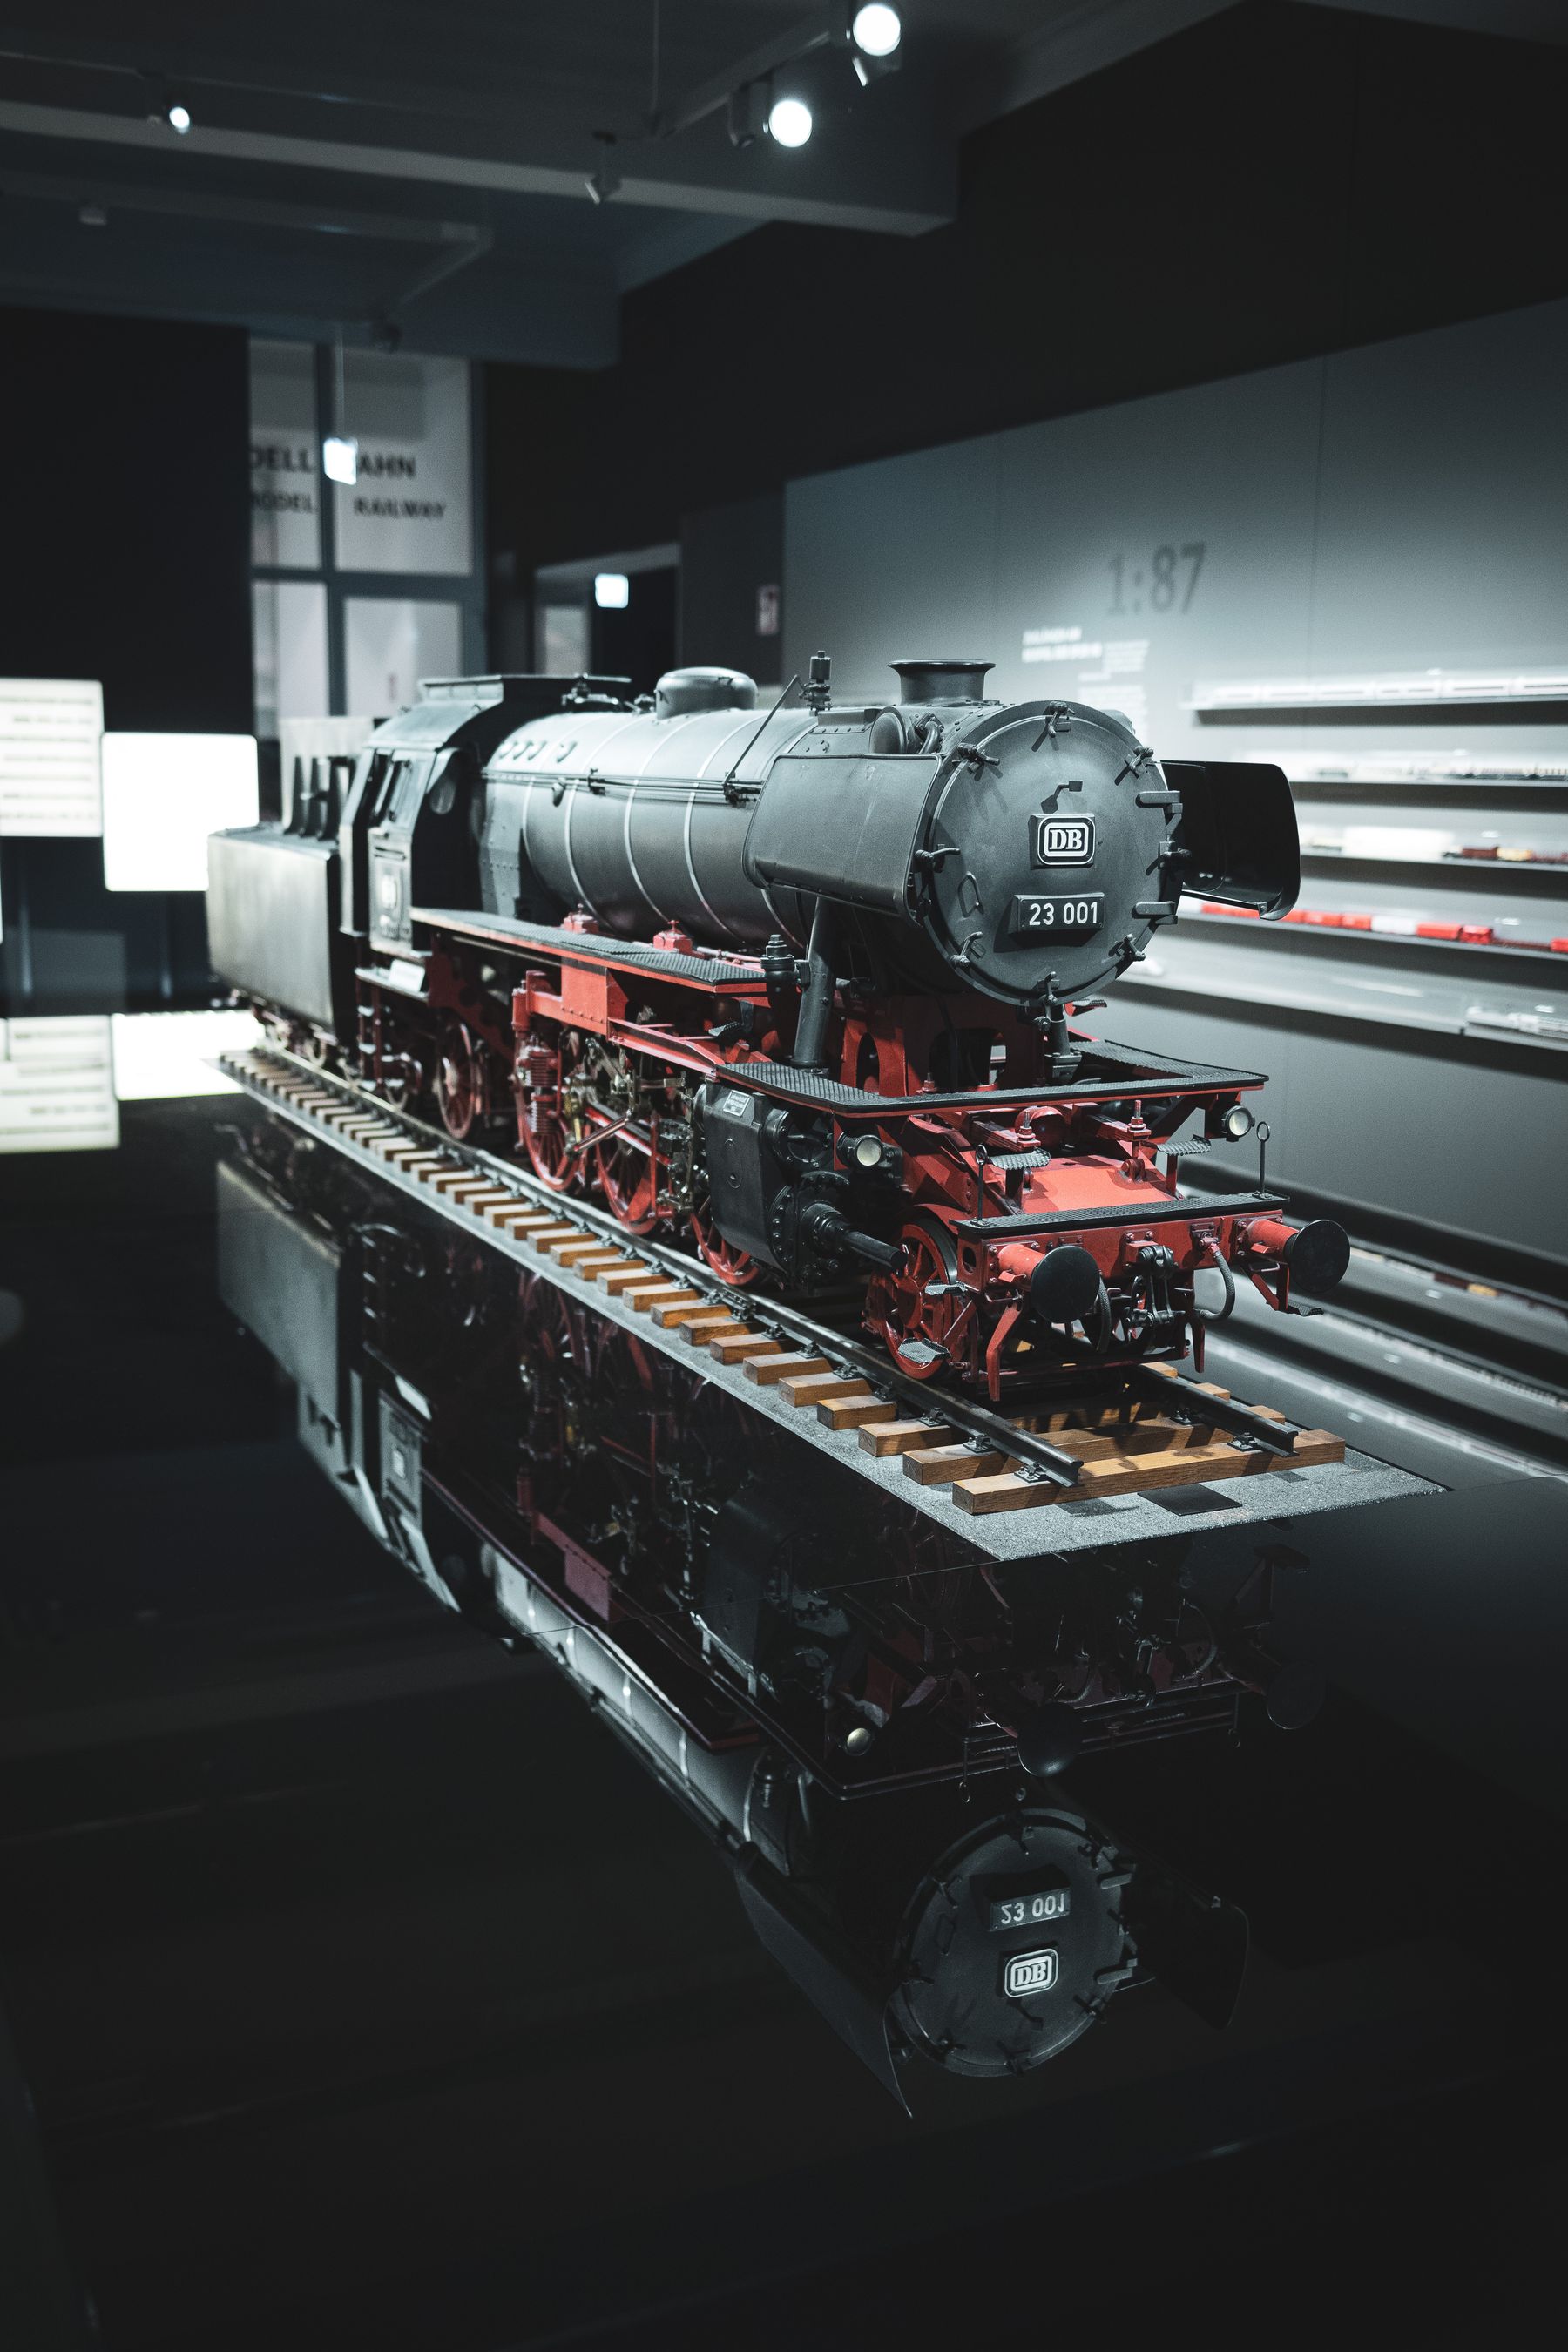 The image showcases a detailed scale model of a classic steam locomotive, predominantly black with red trimmings, displayed on tracks. The model is identified as '23 001' marked on the locomotive's front, with the 'DB' logo on the front. The setting appears to be an exhibition with carefully directed lighting highlighting the train model and creating a reflective surface below it. In the background there are informational displays and subdued lighting, suggesting an indoor museum environment.